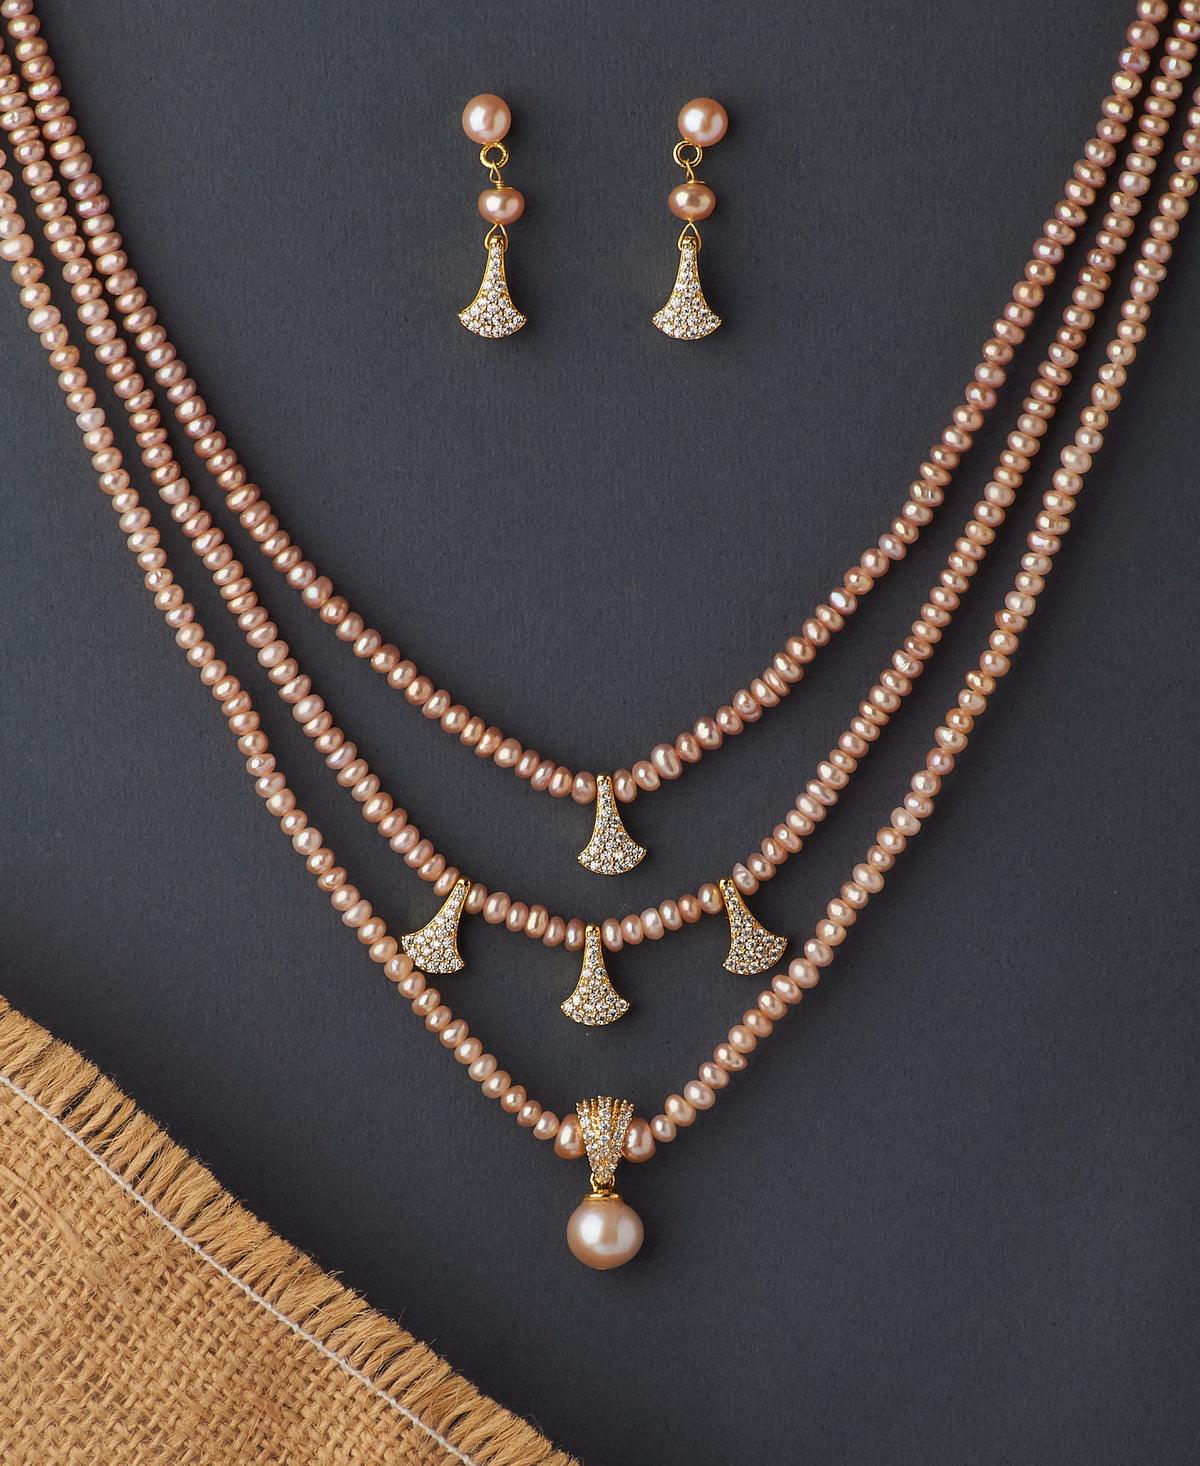 Vintage Stone Studded Pearl Necklace Set - Chandrani Pearls